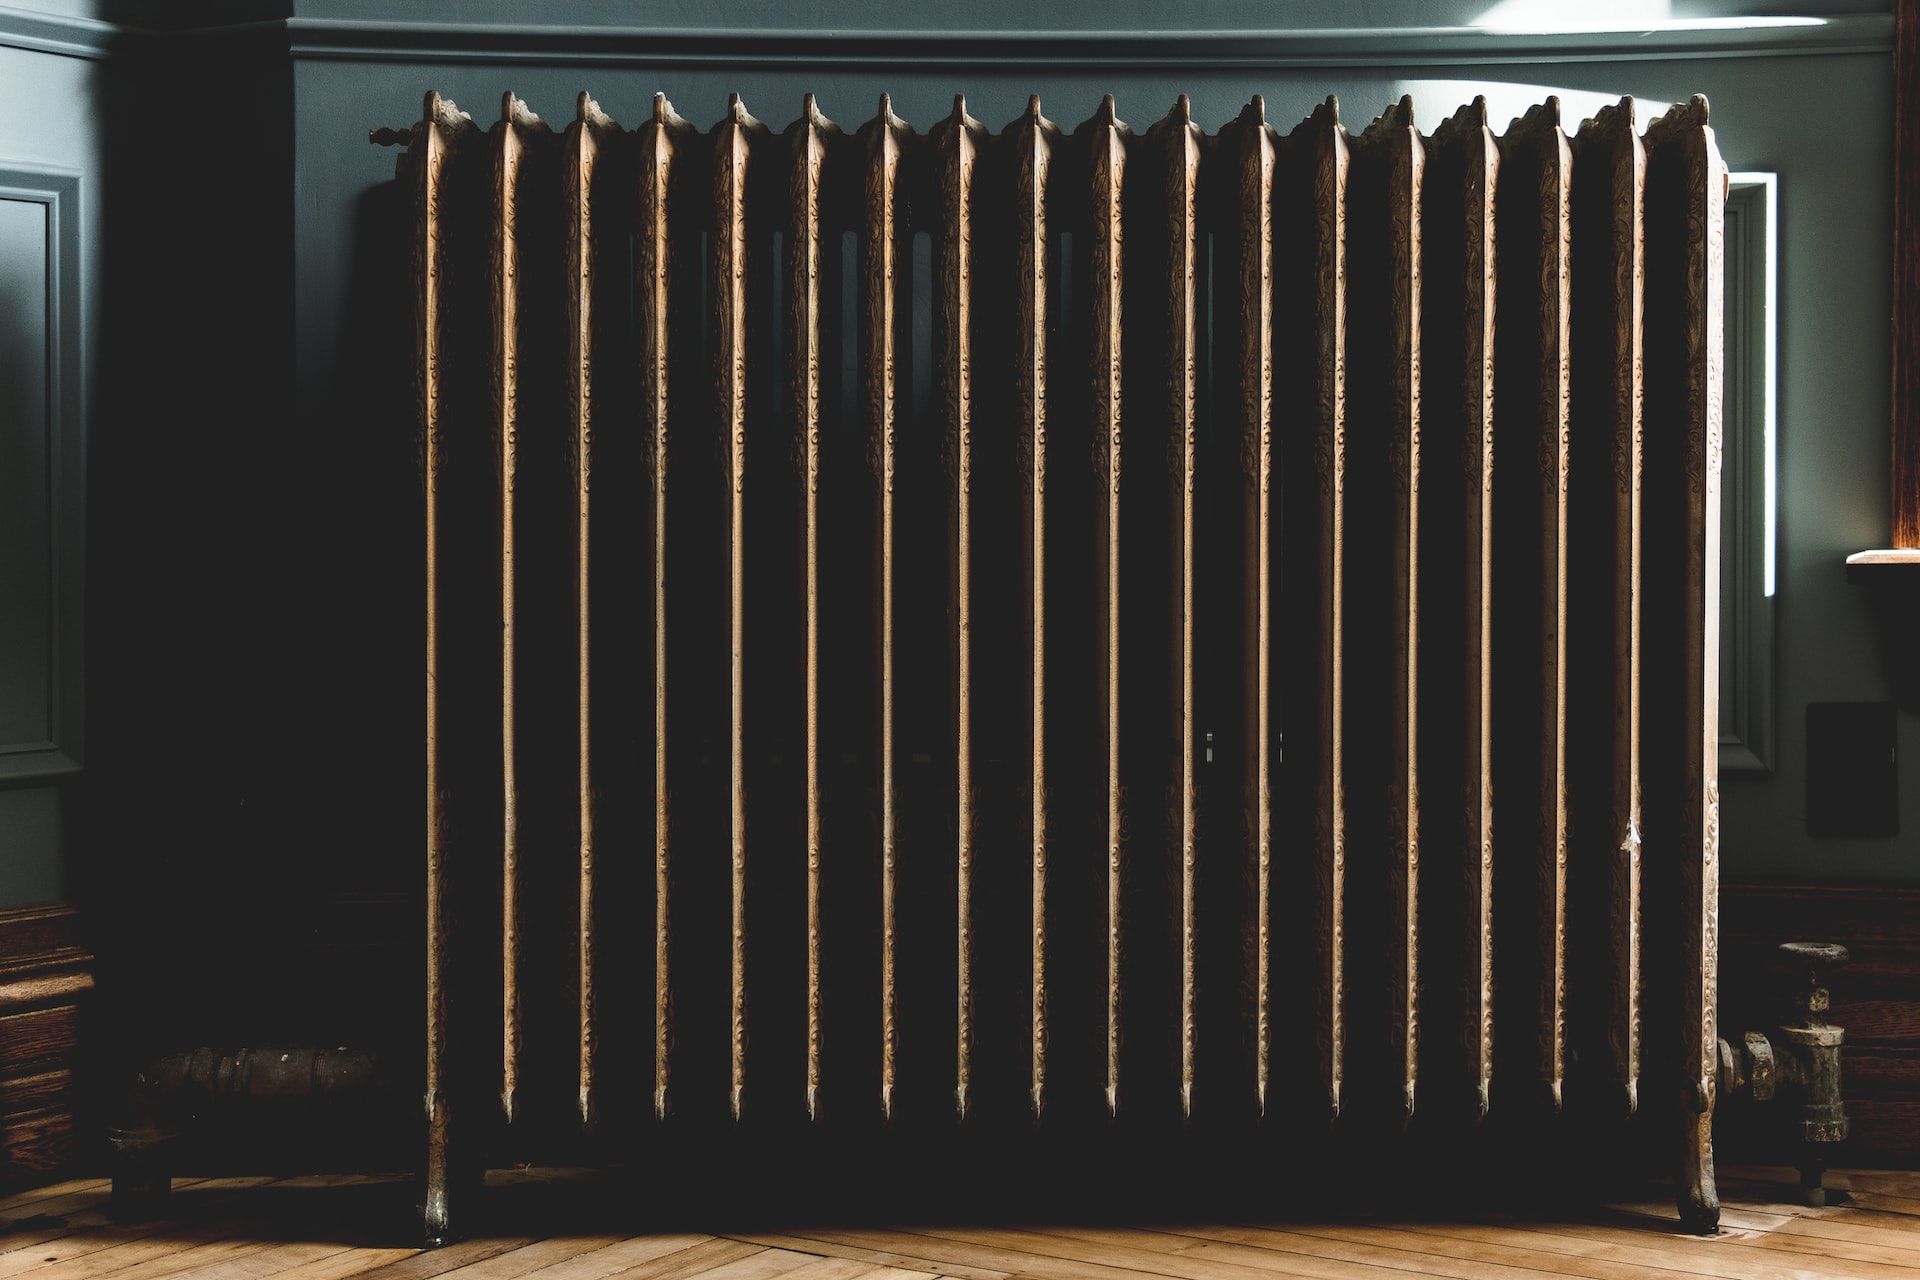 An antique brass radiator in a home.